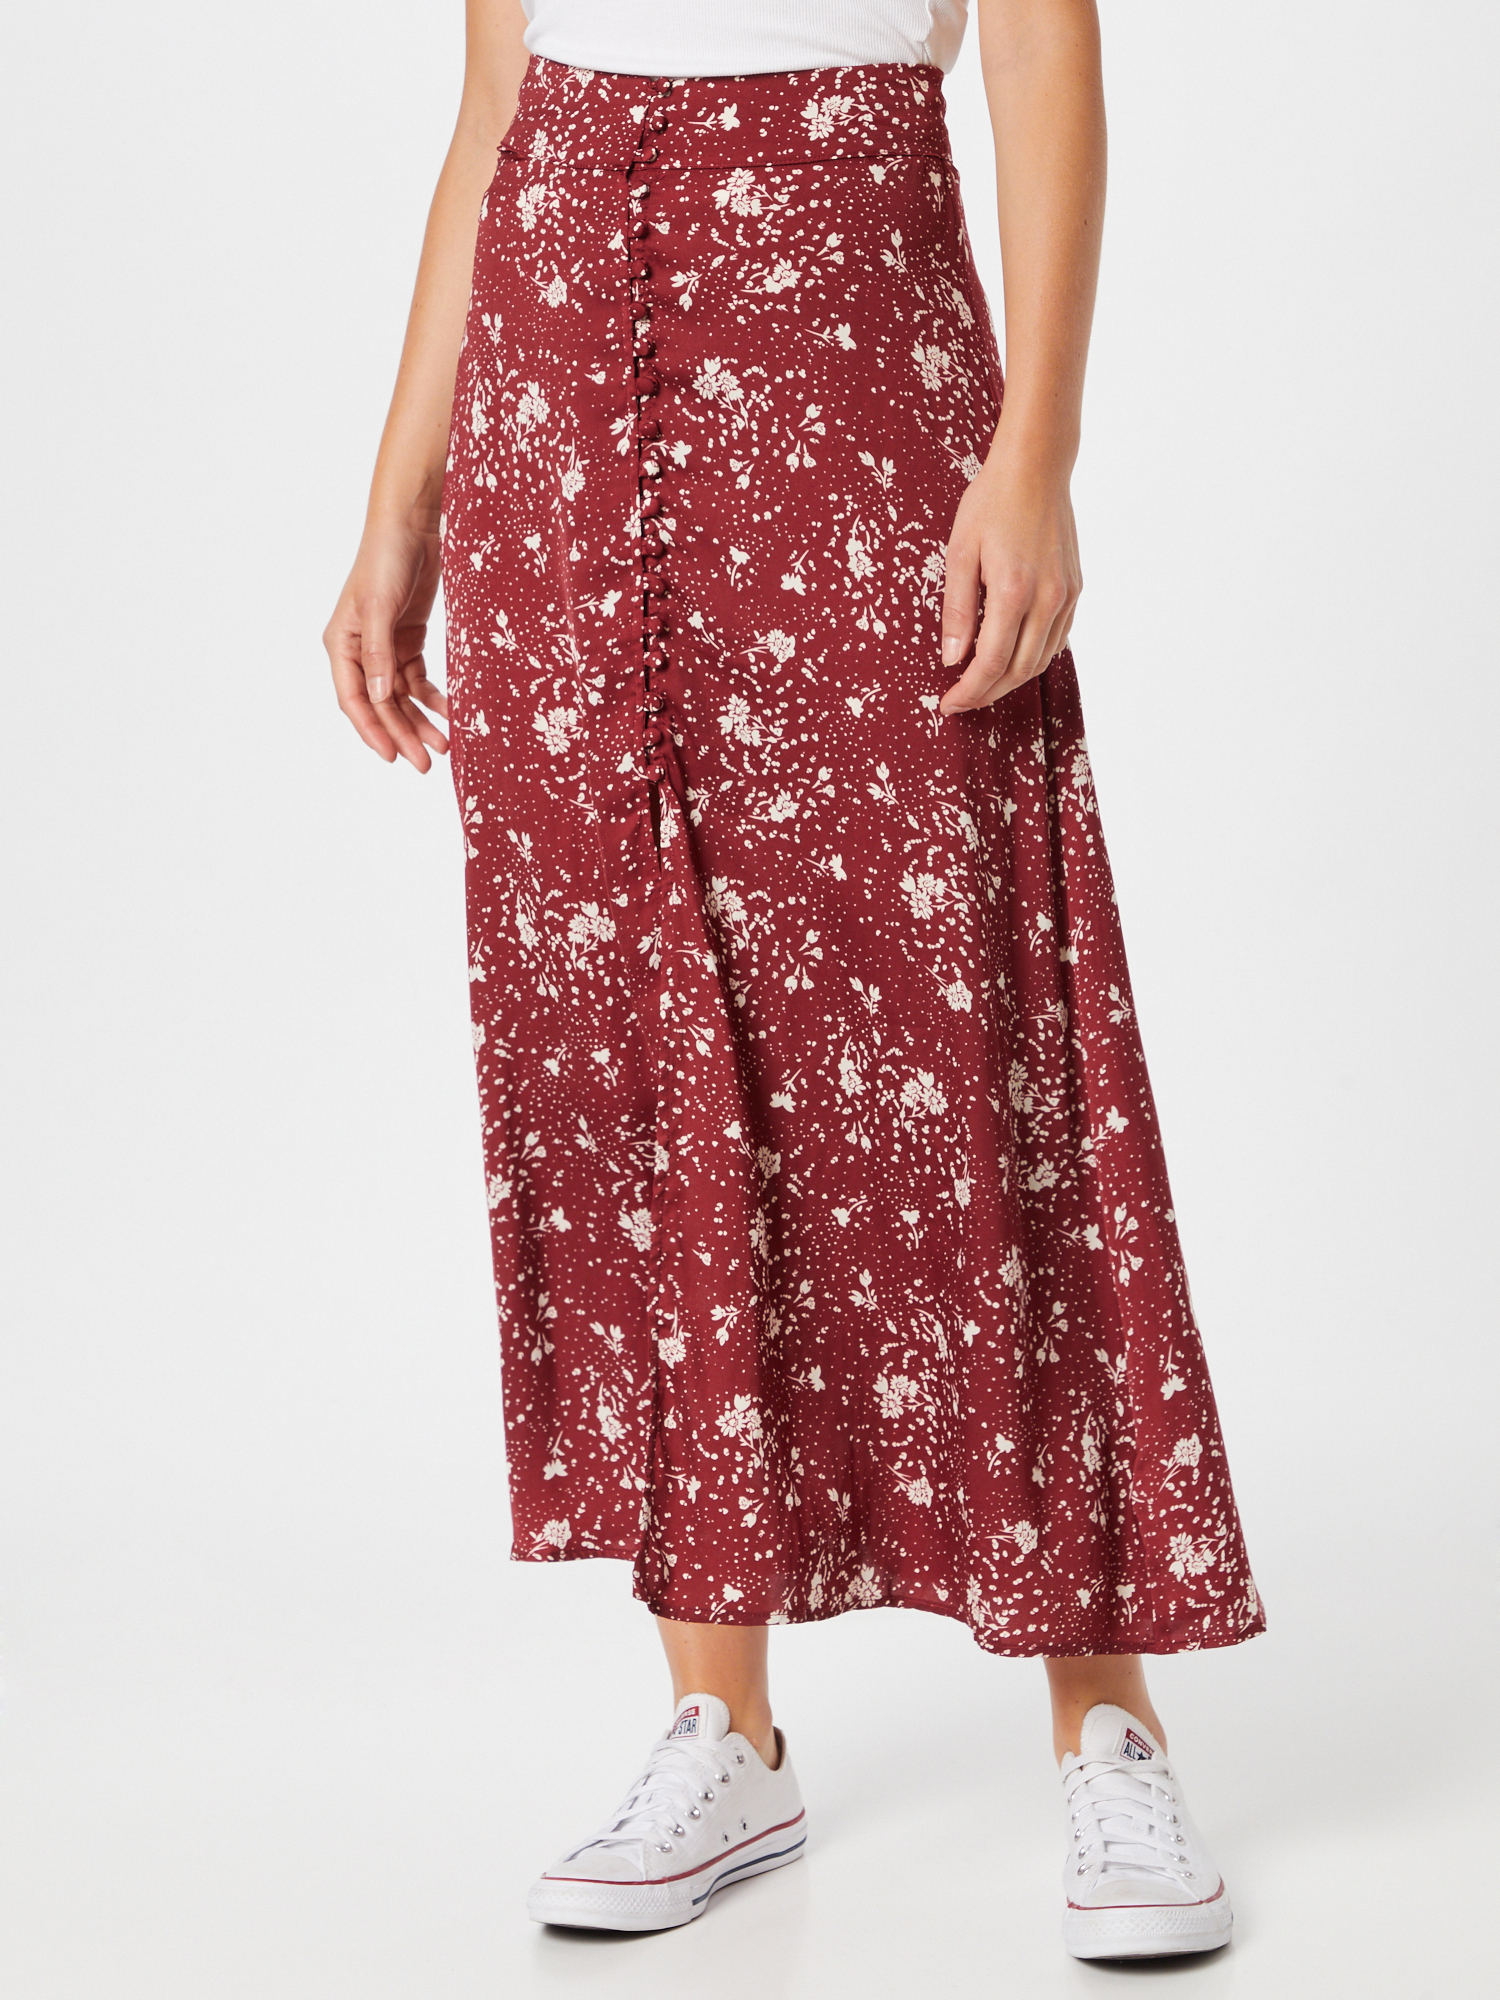 Donna Gonne Free People Gonna SAMMY in Rosso Vino 